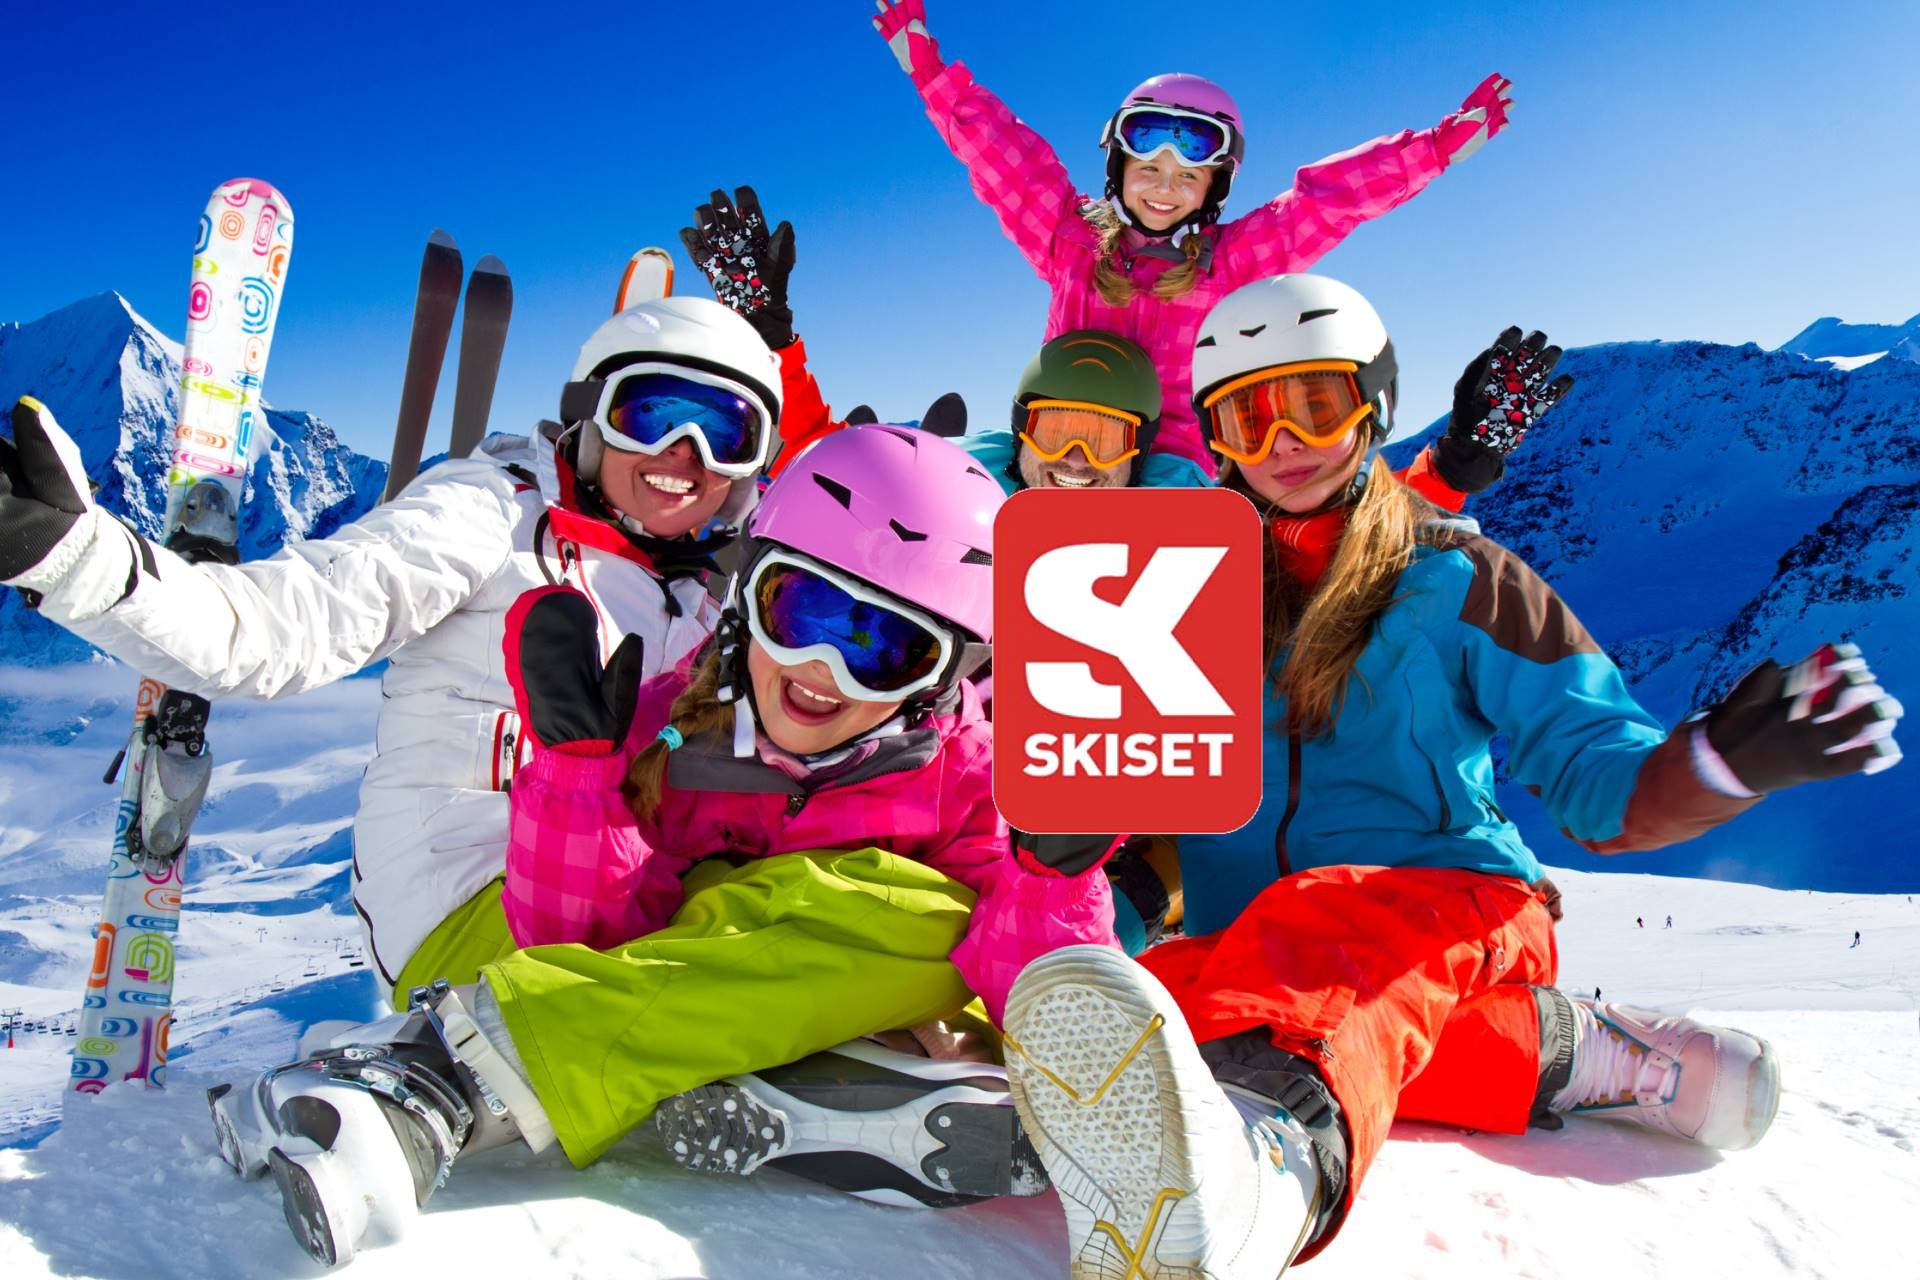 Save 50% OFF on material reservation with Skiset